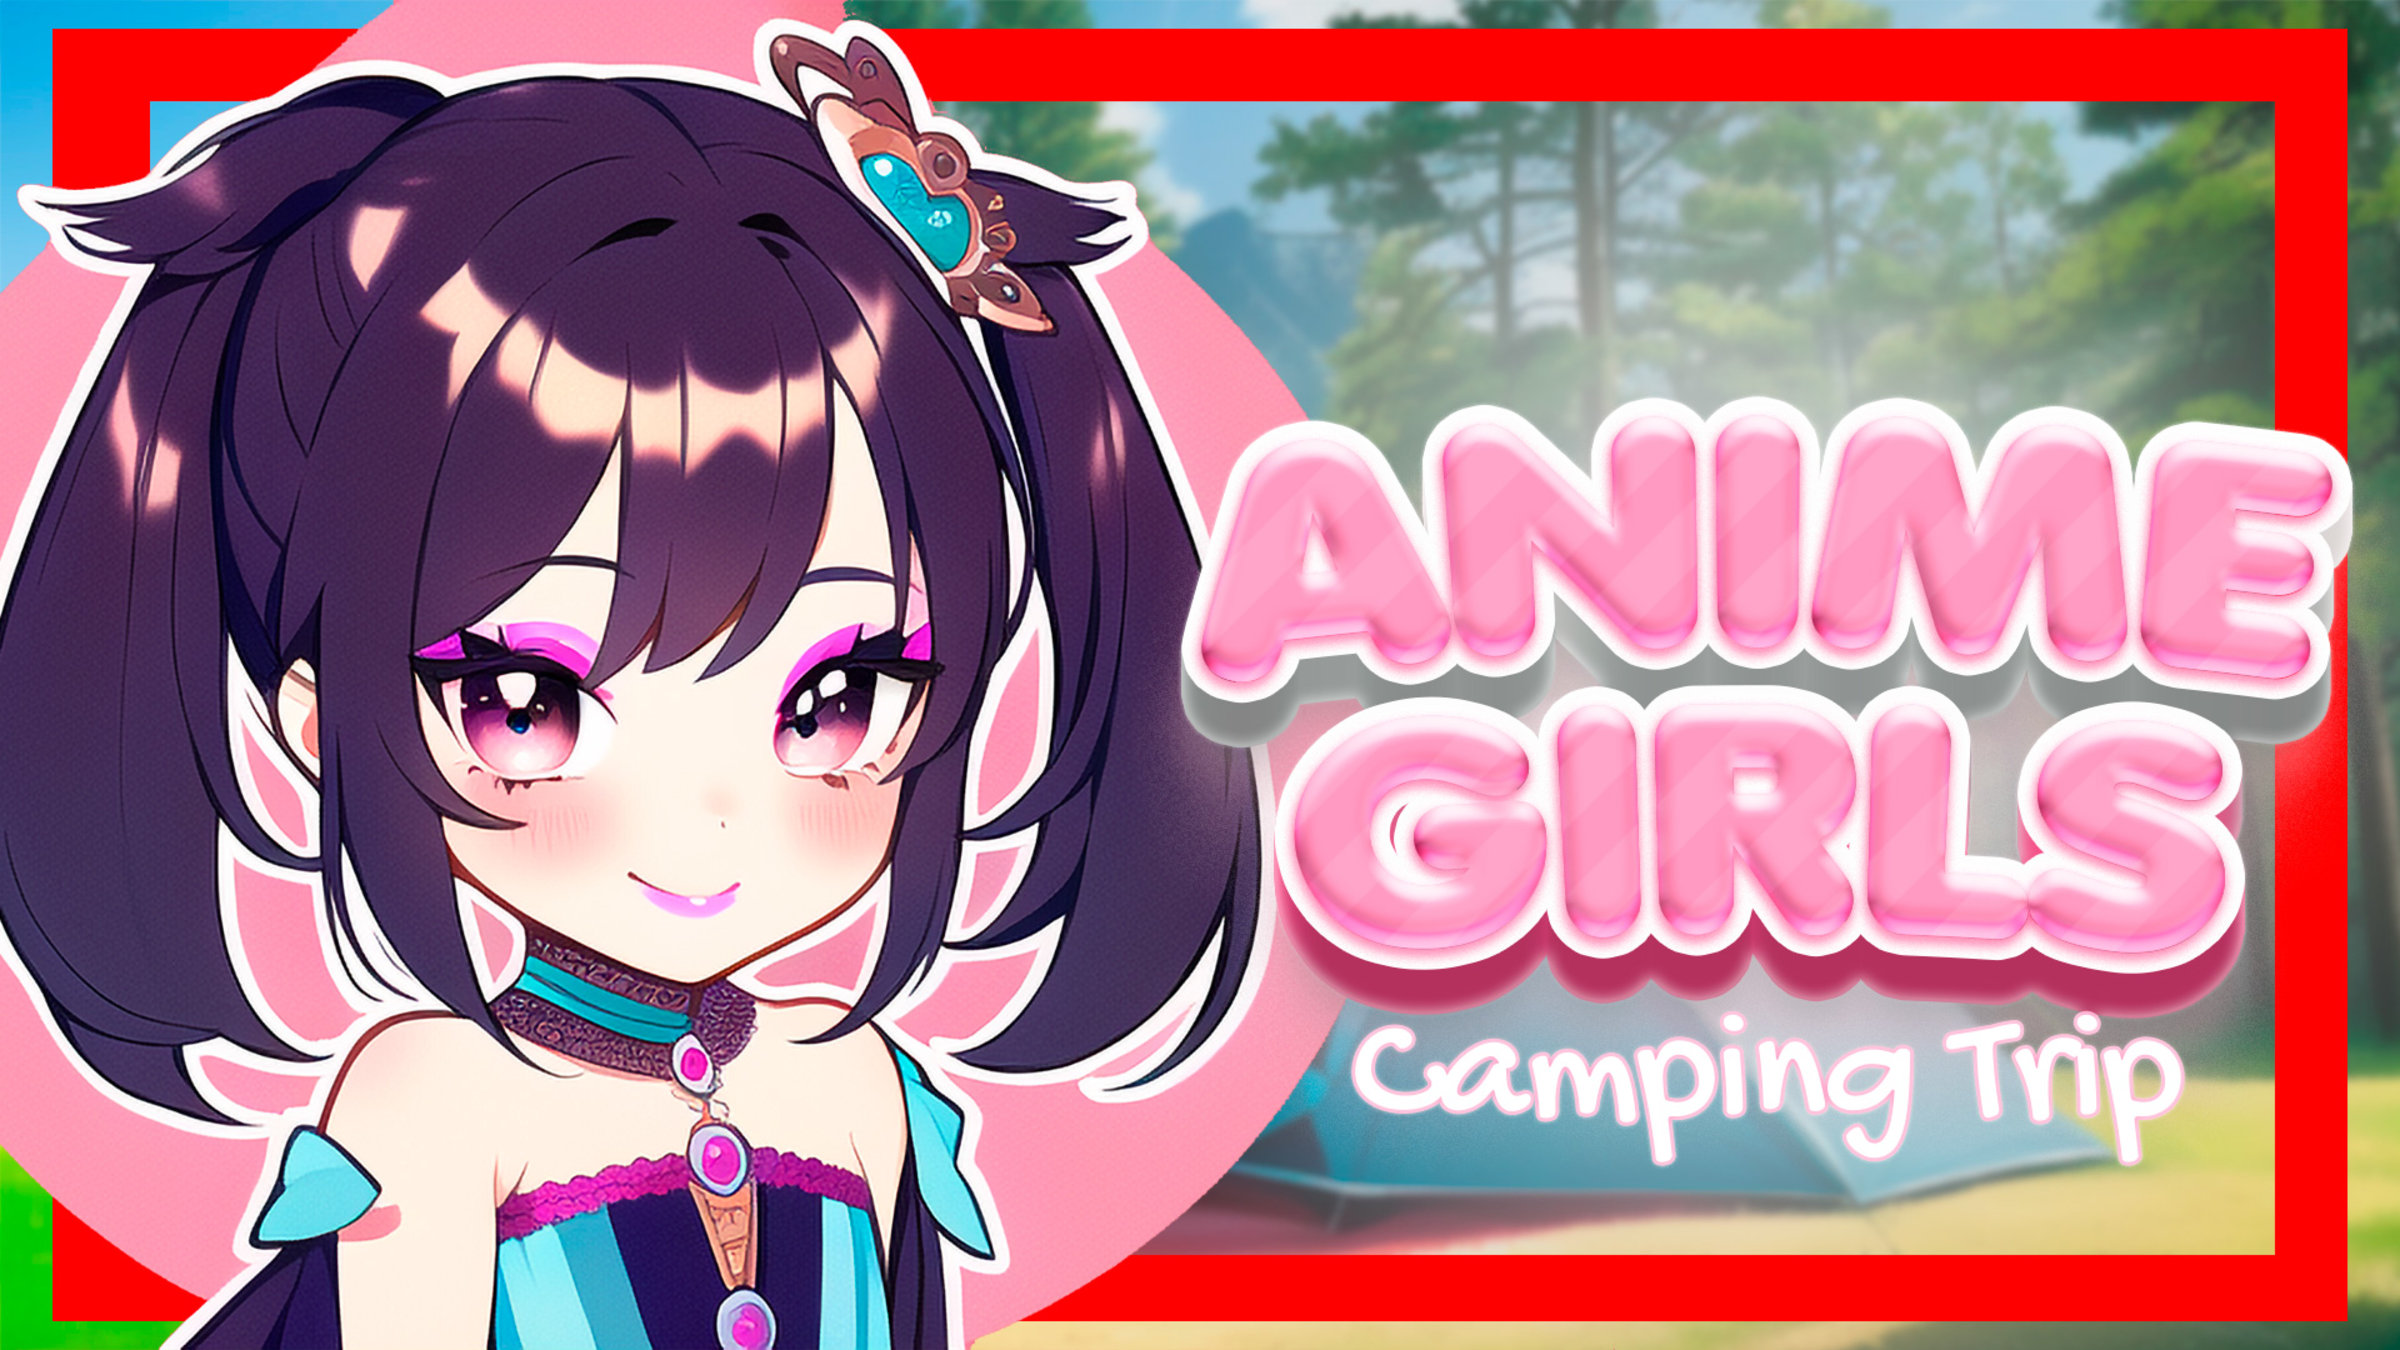 https://assets.nintendo.com/image/upload/c_fill,w_1200/q_auto:best/f_auto/dpr_2.0/ncom/en_US/games/switch/a/anime-girls-camping-trip-switch/